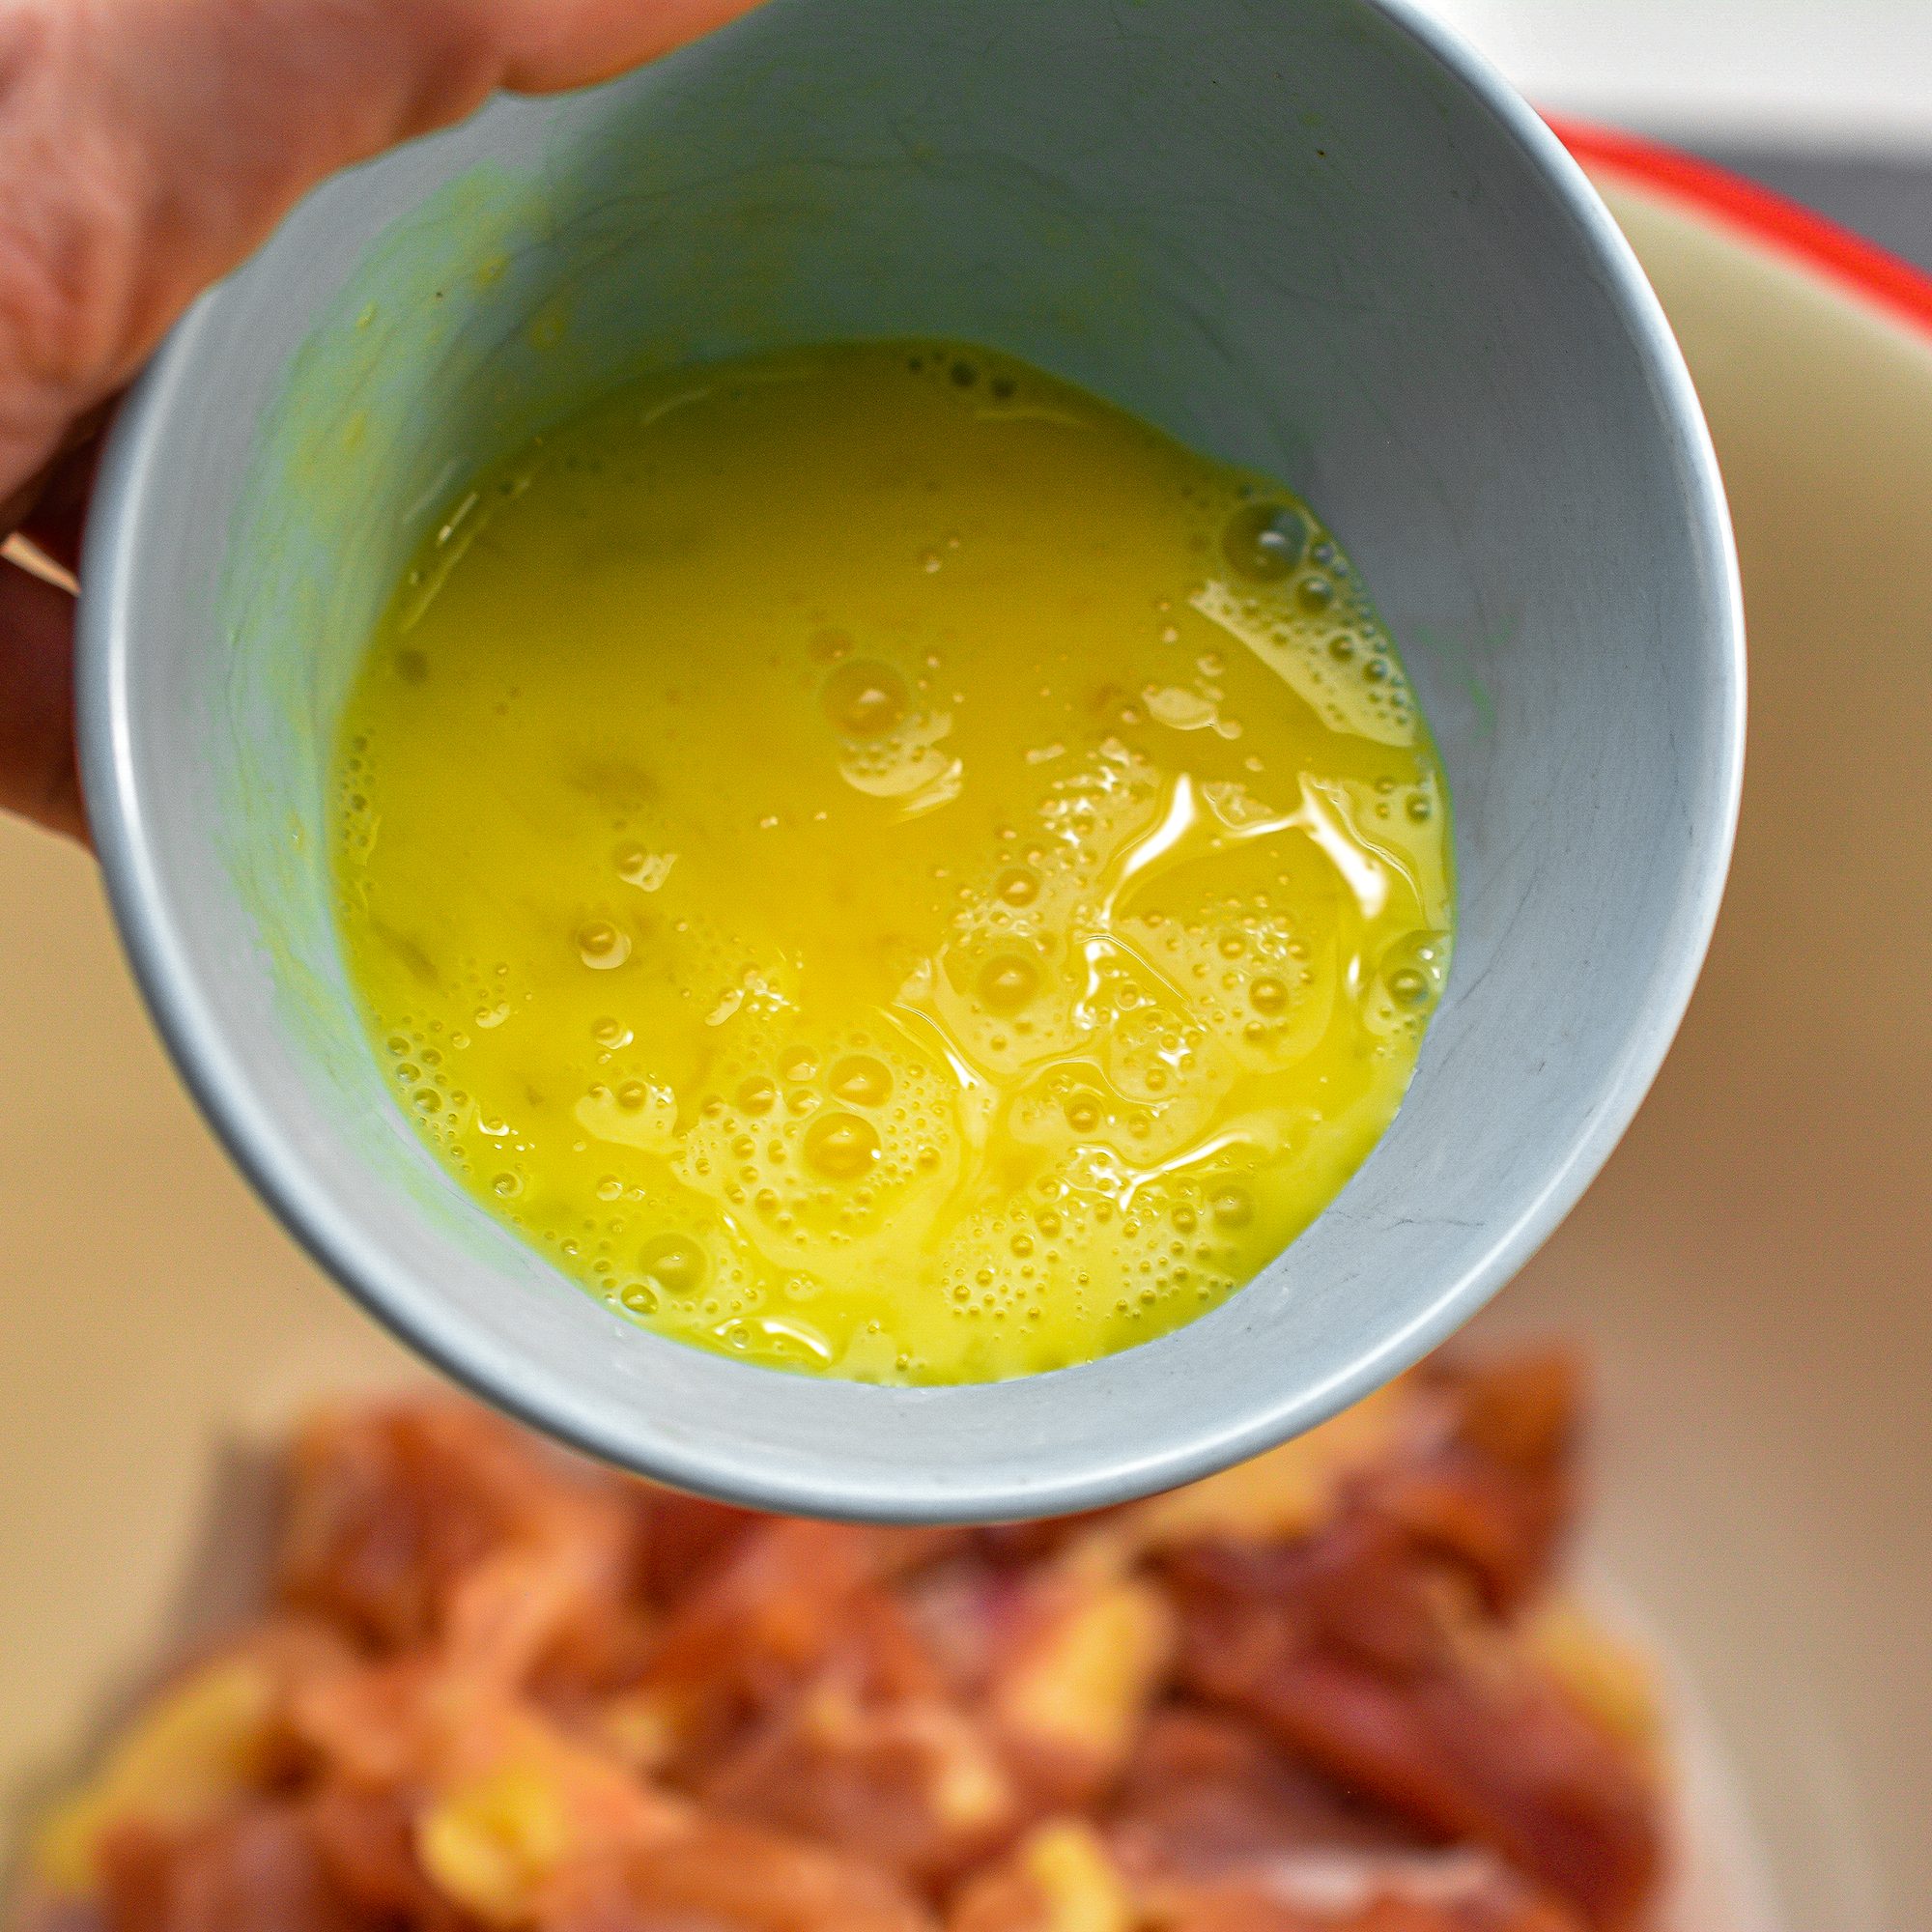 Add the chicken, egg, white pepper, and 1 tsp sugar to a mixing bowl, and toss to combine.